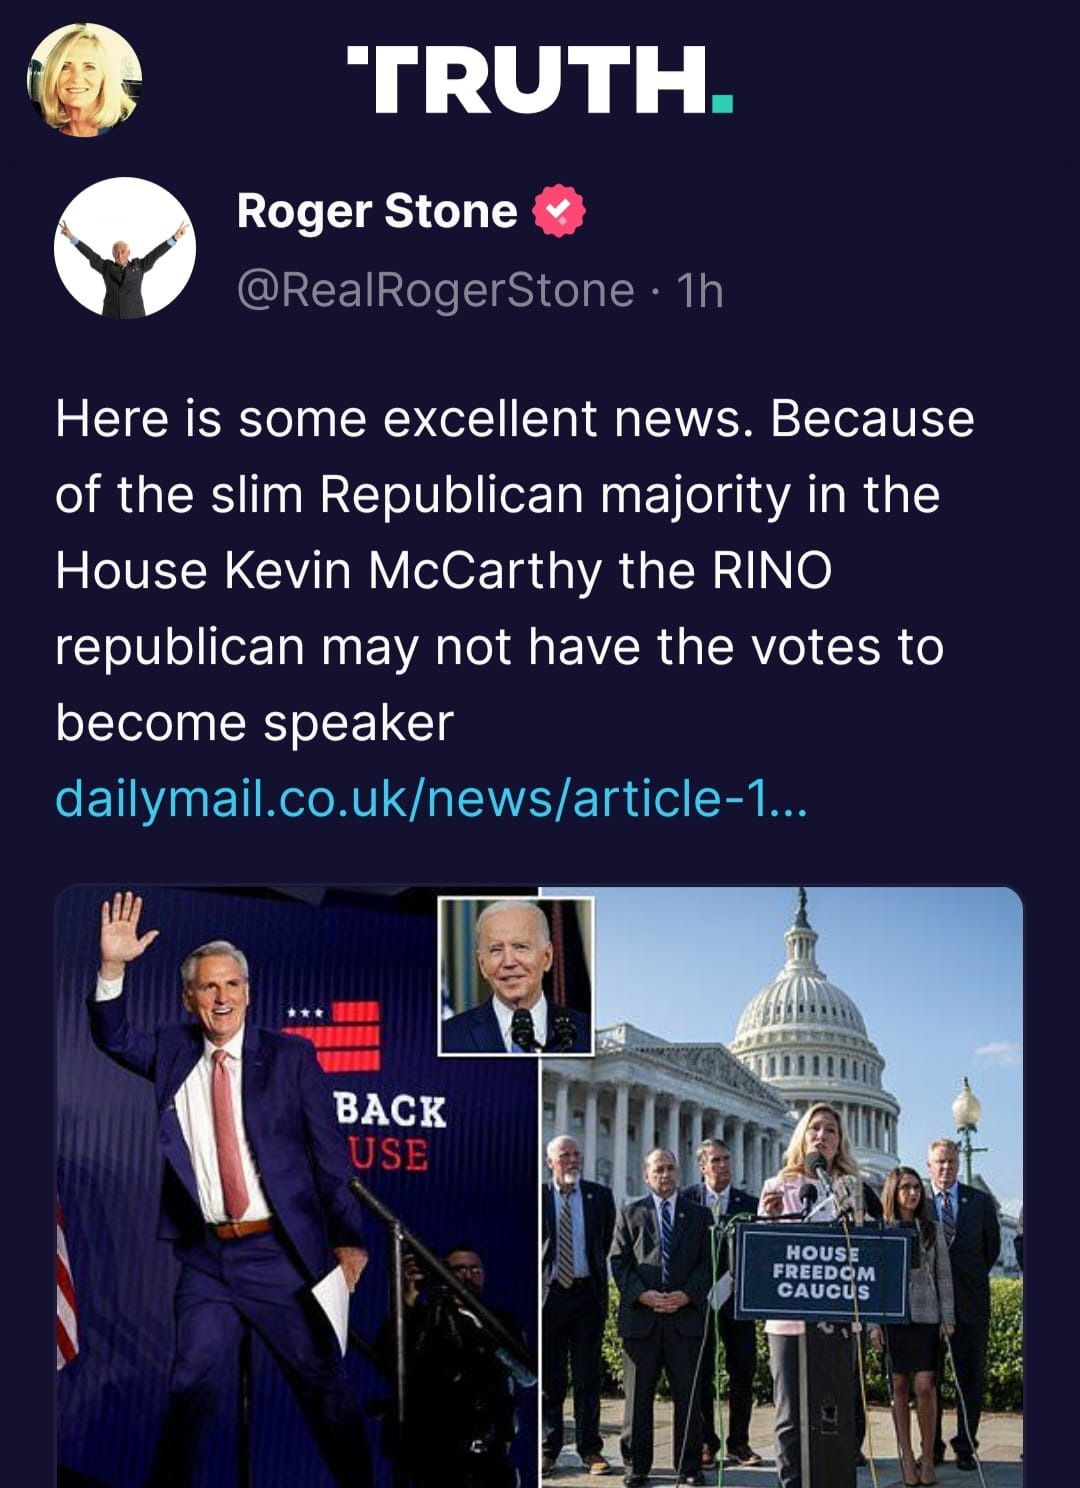 May be a Twitter screenshot of 9 people and text that says 'TRUTH. Roger Stone @RealRogerStone 1h Here is some excellent news. Because of the slim Republican majority in the House Kevin McCarthy the RINO republican may not have the votes to become speaker dailymail.co.uk/news/article-.. BACK USE HOUSE FREEDOM CAUCUS'